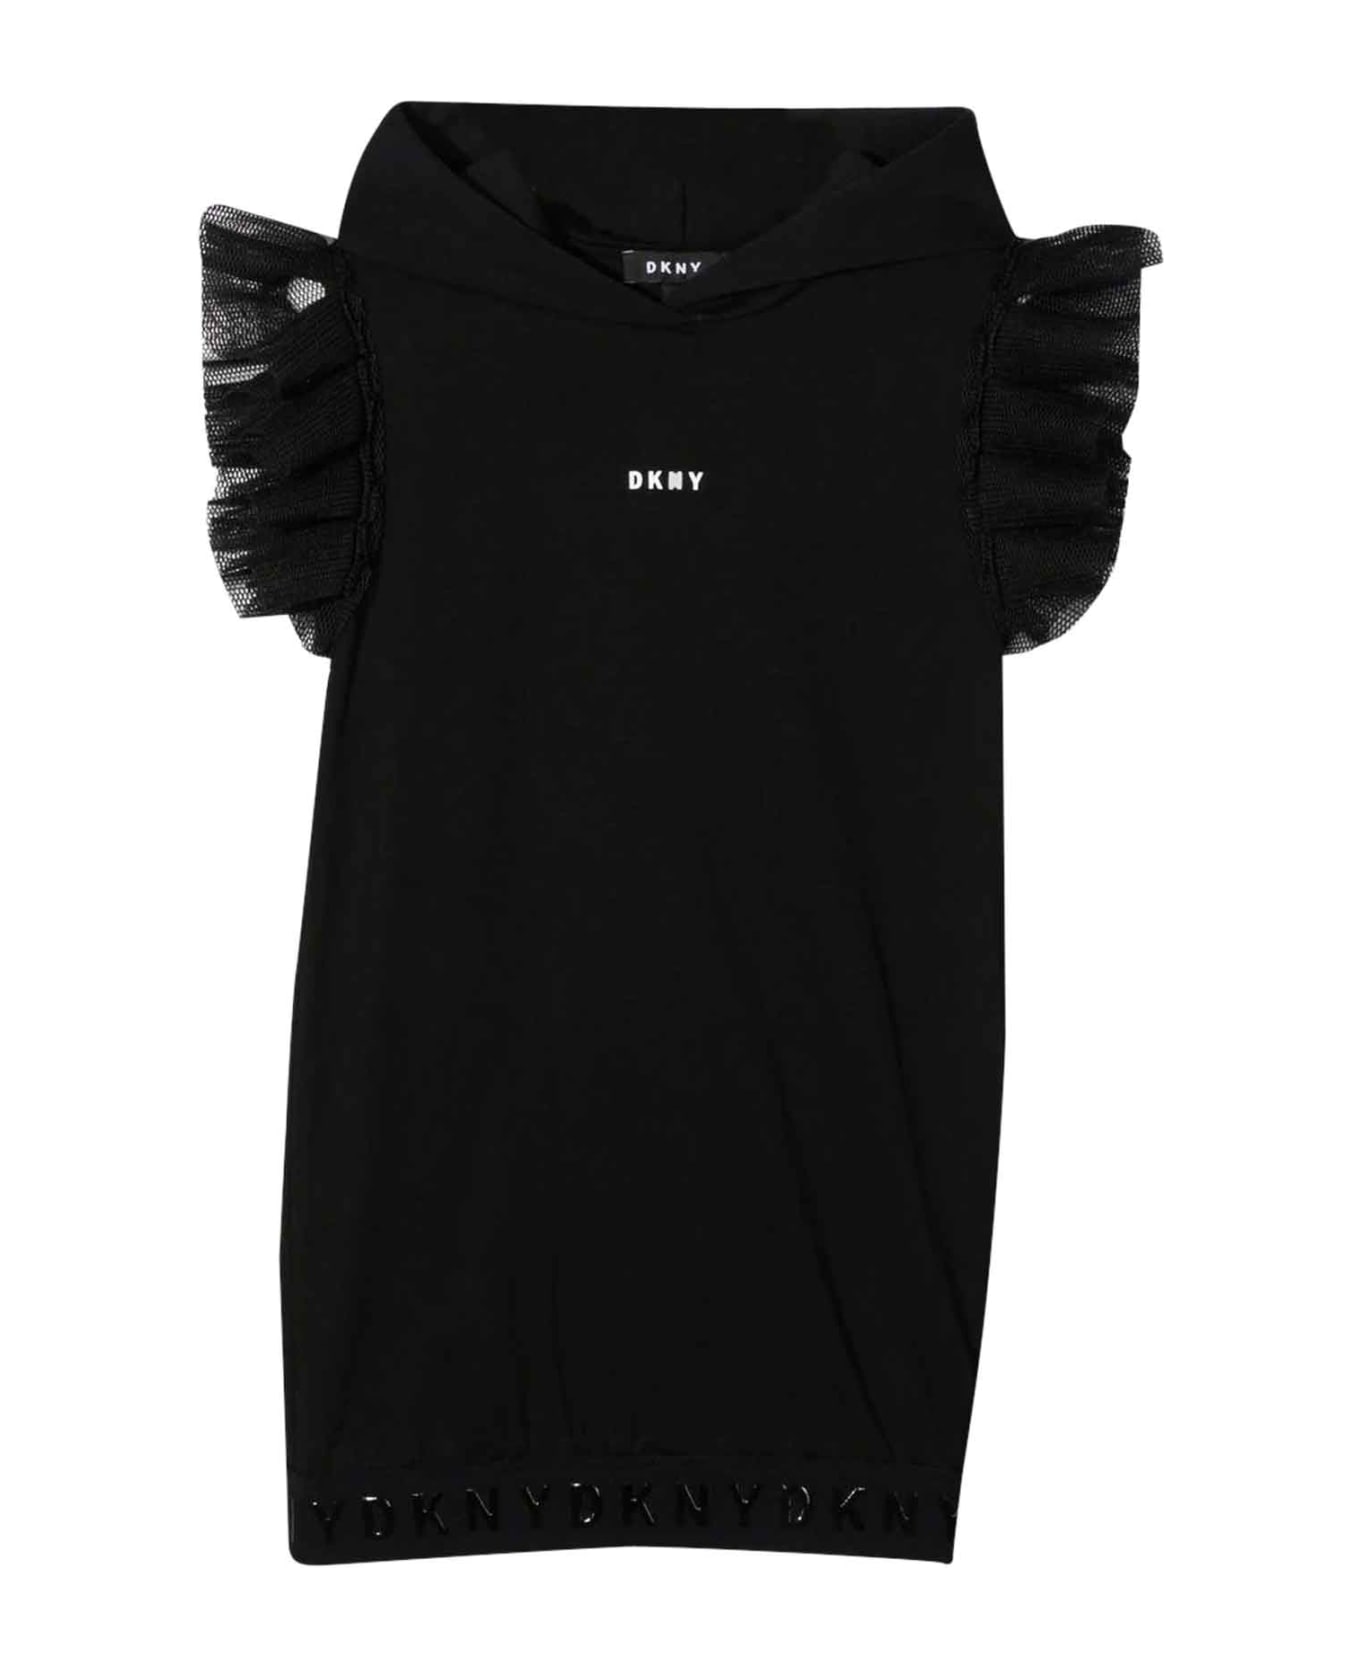 DKNY Black Girl Dress With Rouches - B Nero